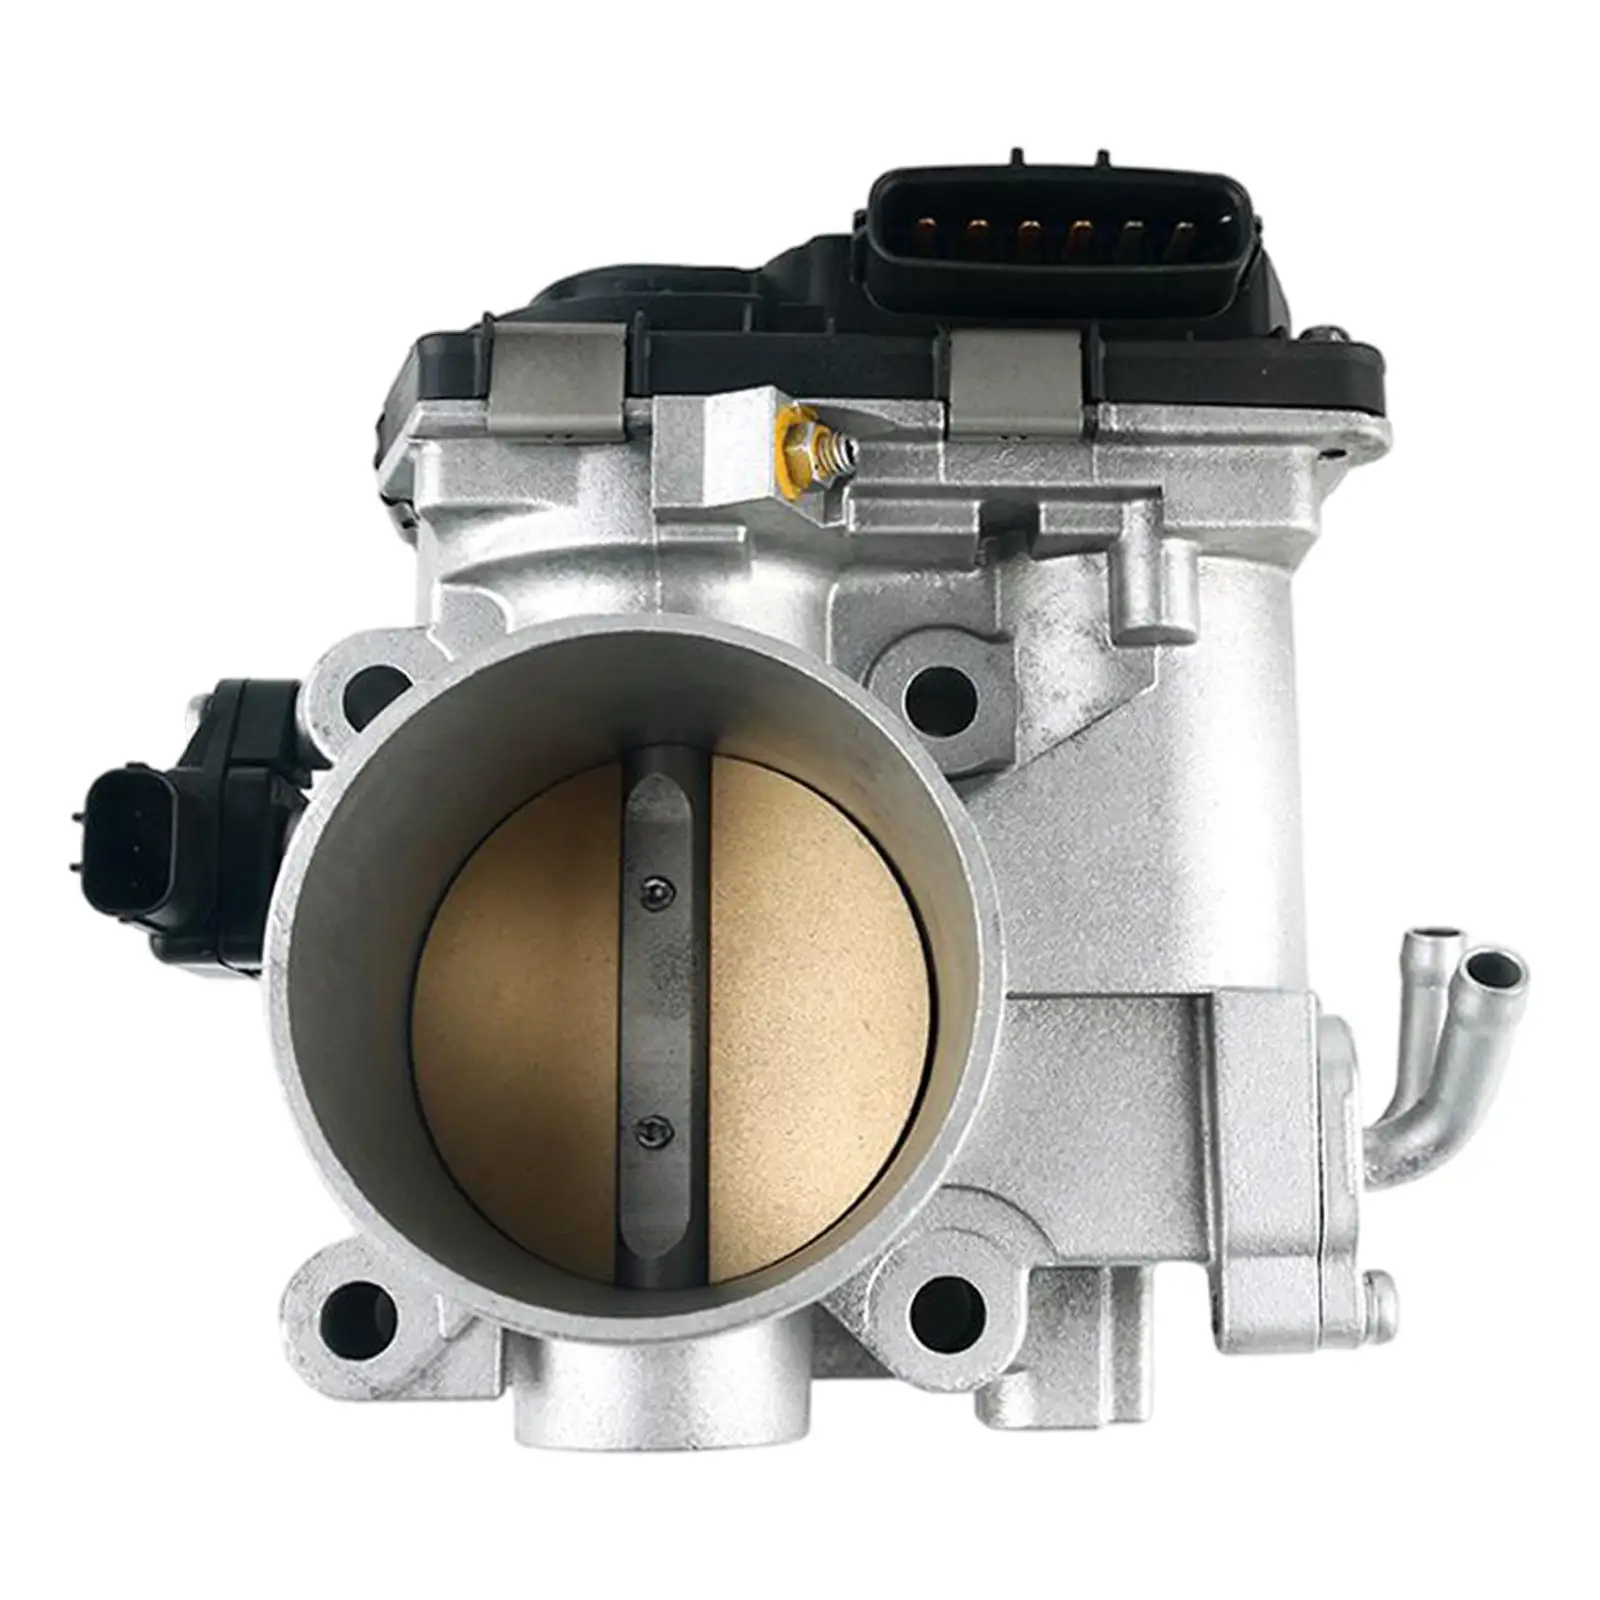 

Electronic Throttle Body Silver Throttle Assembly Fit for Honda Accord 3.0L V6 03-2008 16400-Rca-A01 16400Rcaa01 16400Rkb003